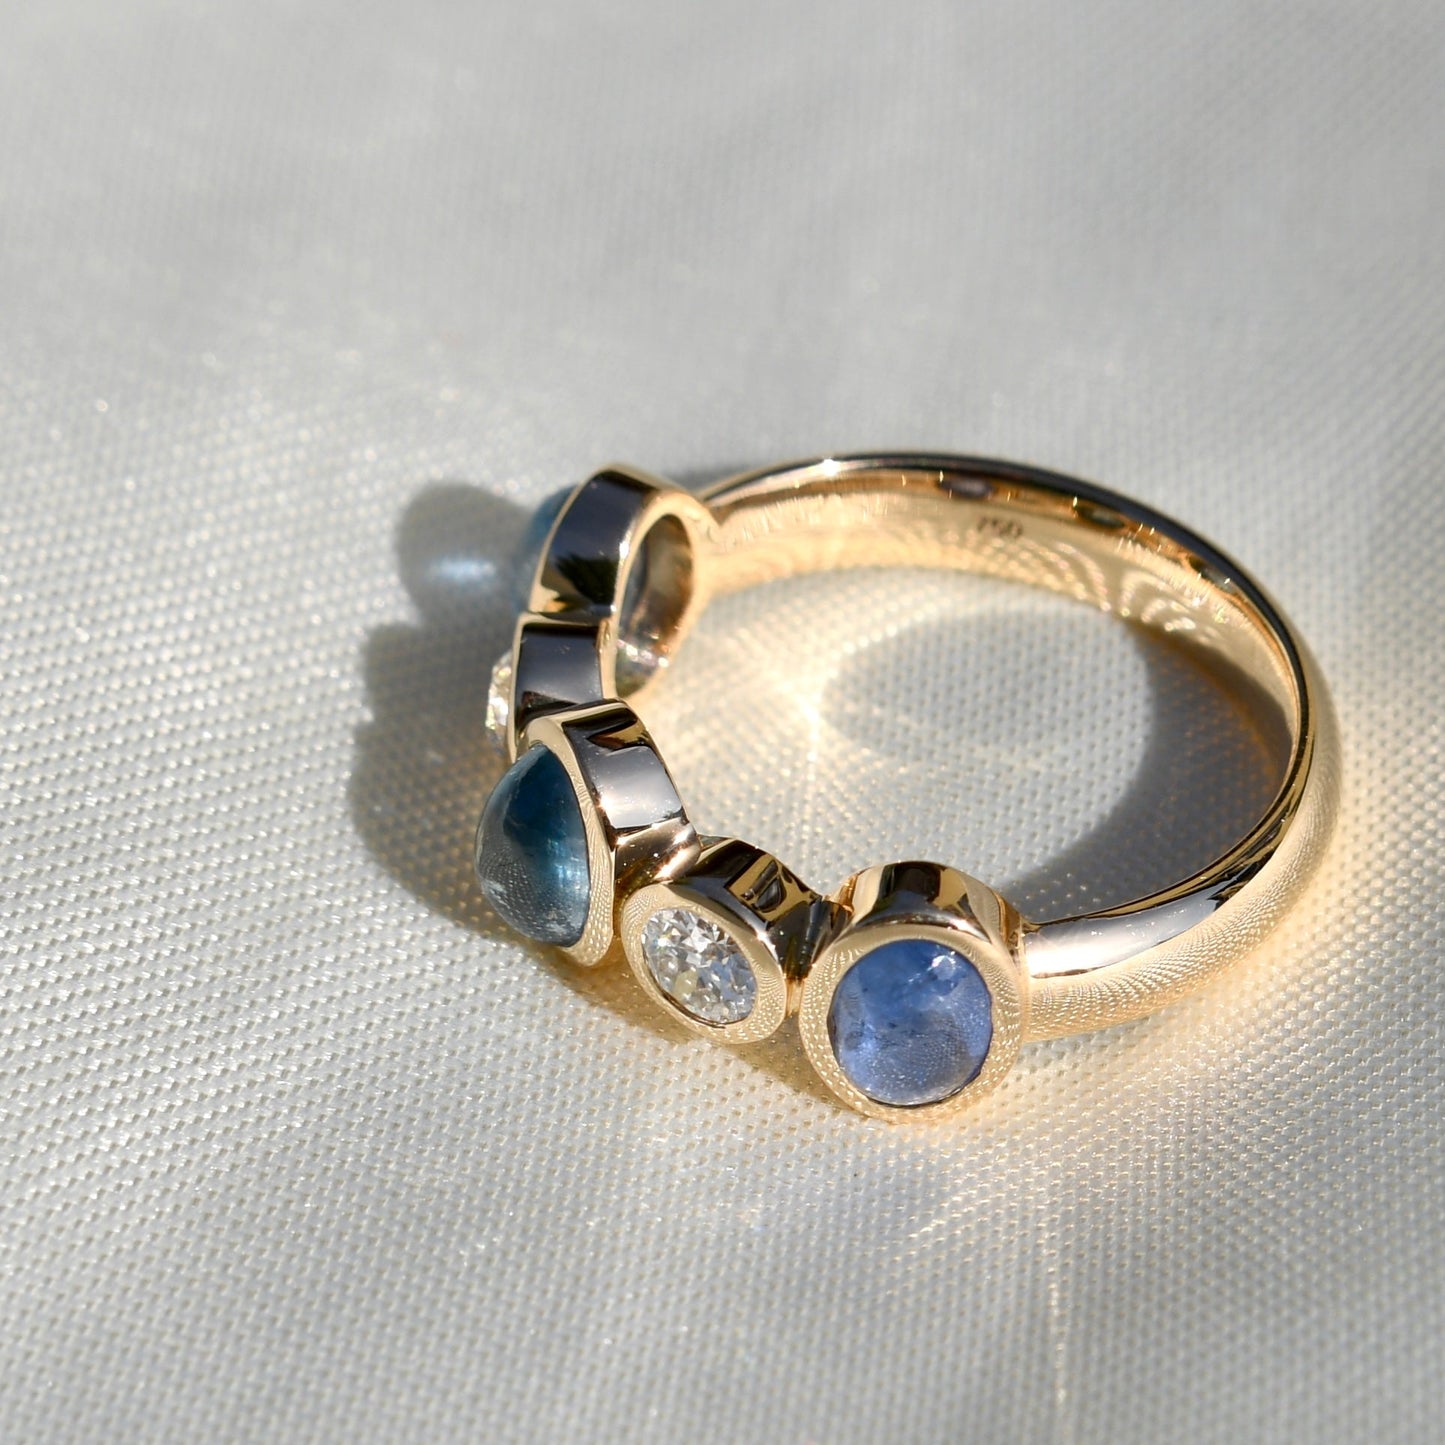 Installment 4/5 for C.- 0.33ct old European cut diamond and sapphire cabochon five stone ring